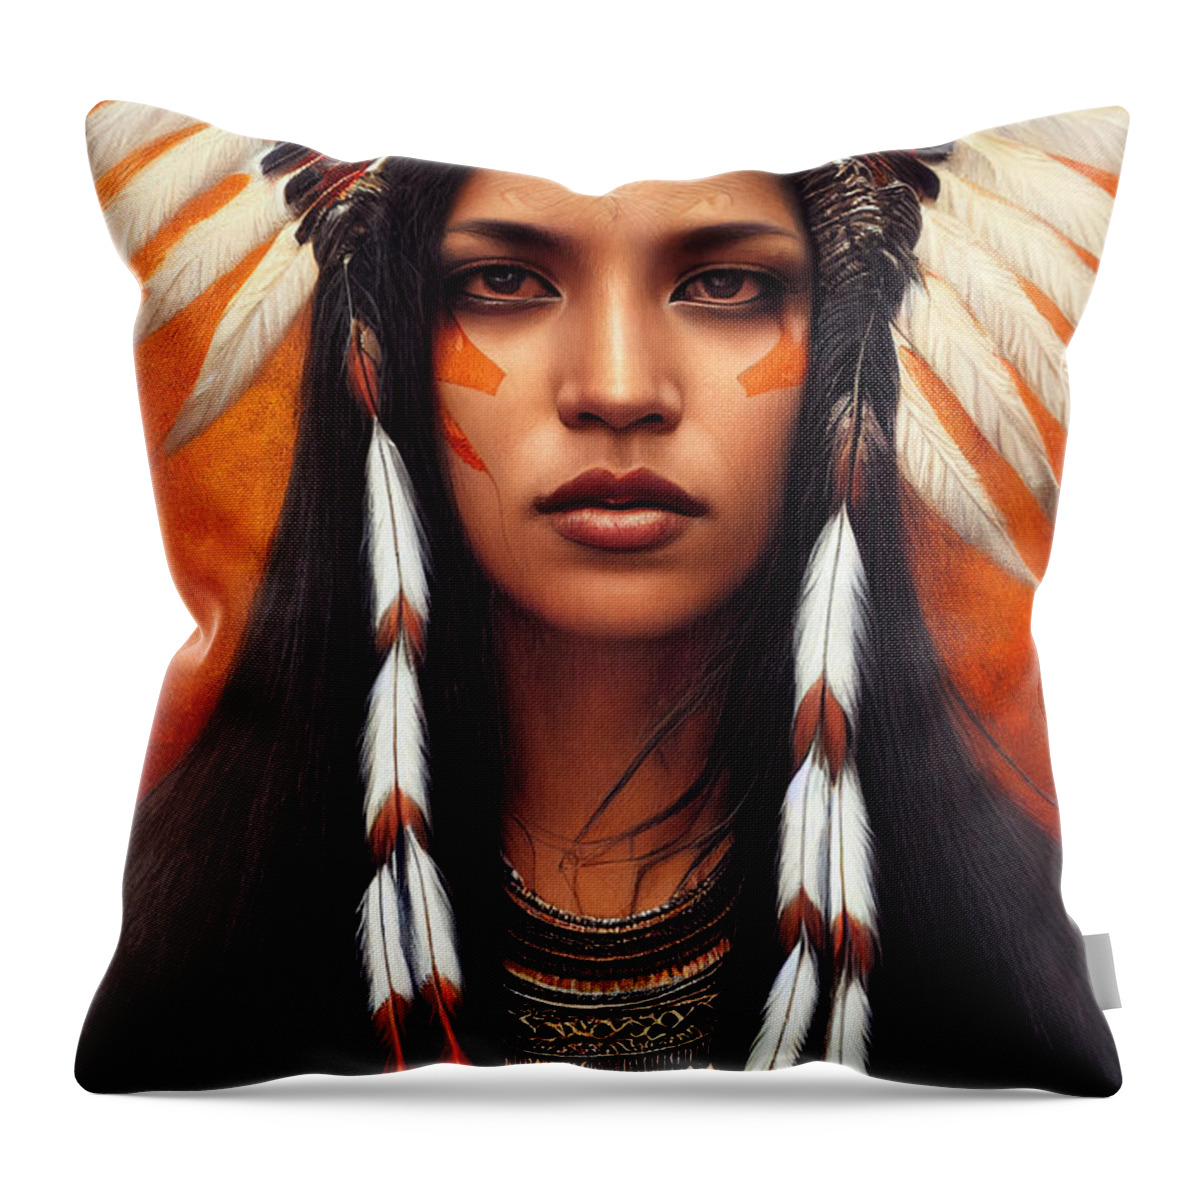 Beautiful Throw Pillow featuring the painting Closeup Portrait Of Beautiful Native American Wom 44777eb4 86ef 451e 8412 15e4cf2e6574 by MotionAge Designs